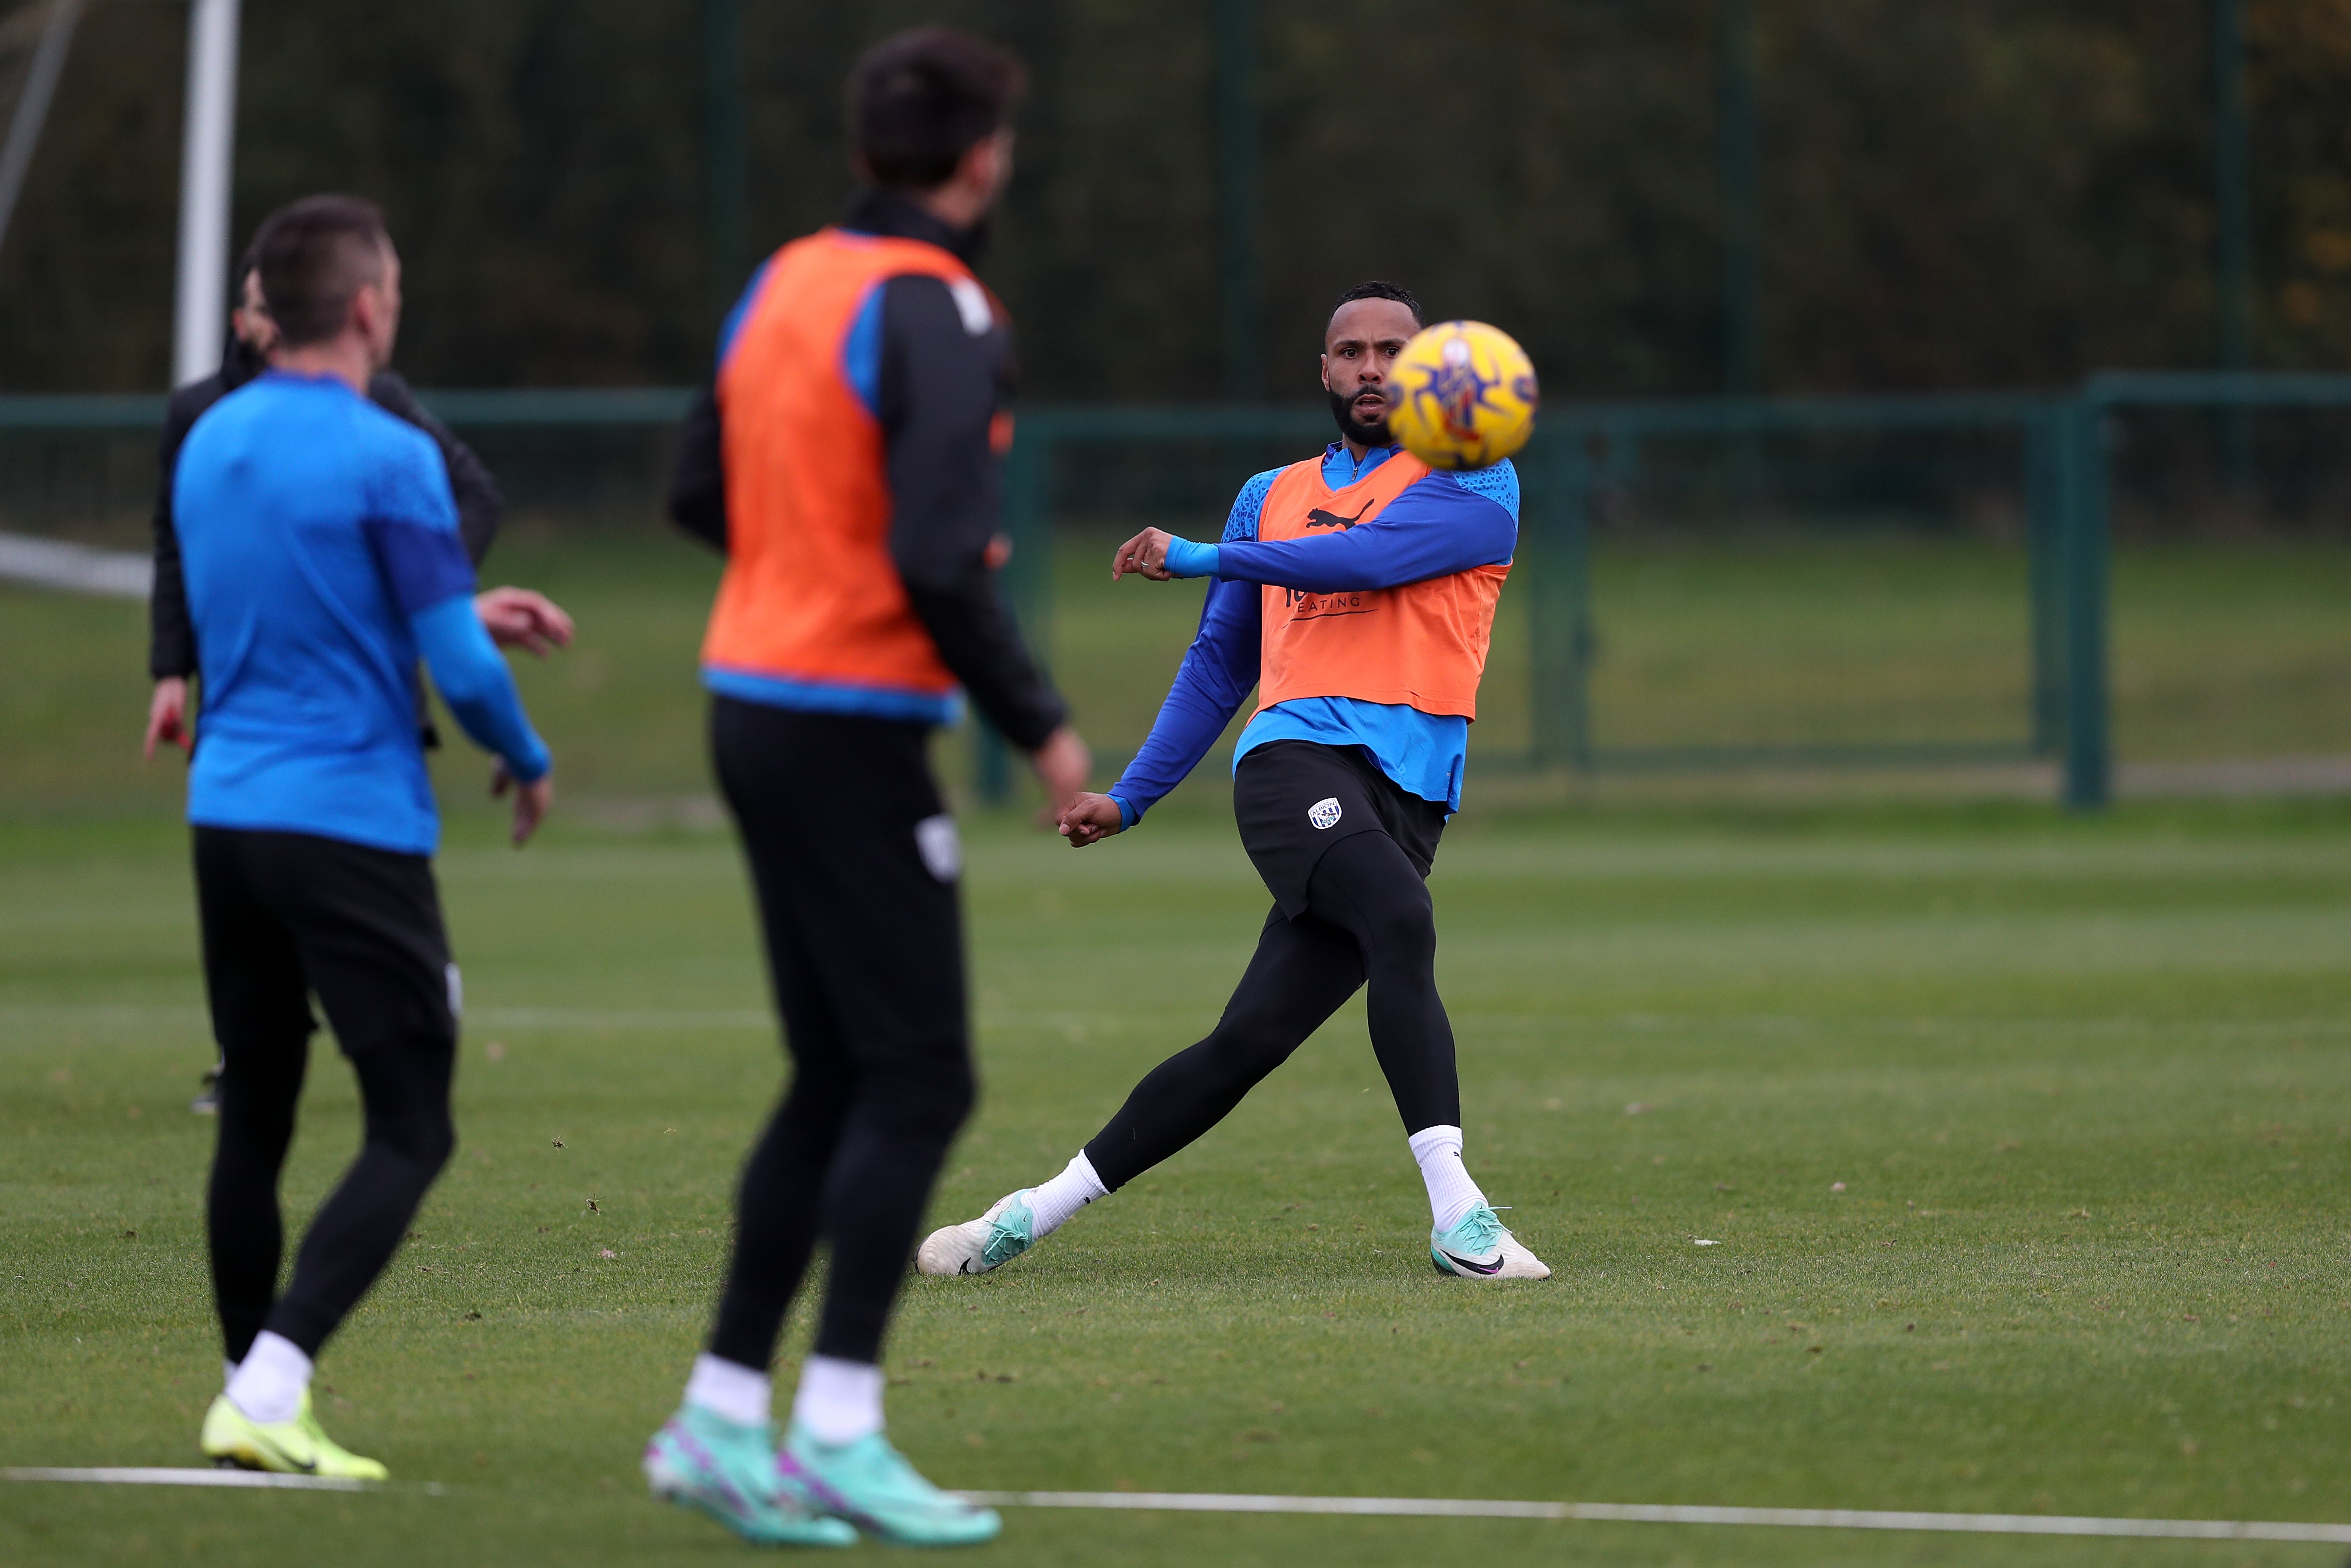 Kyle Bartley strikes the ball in training 